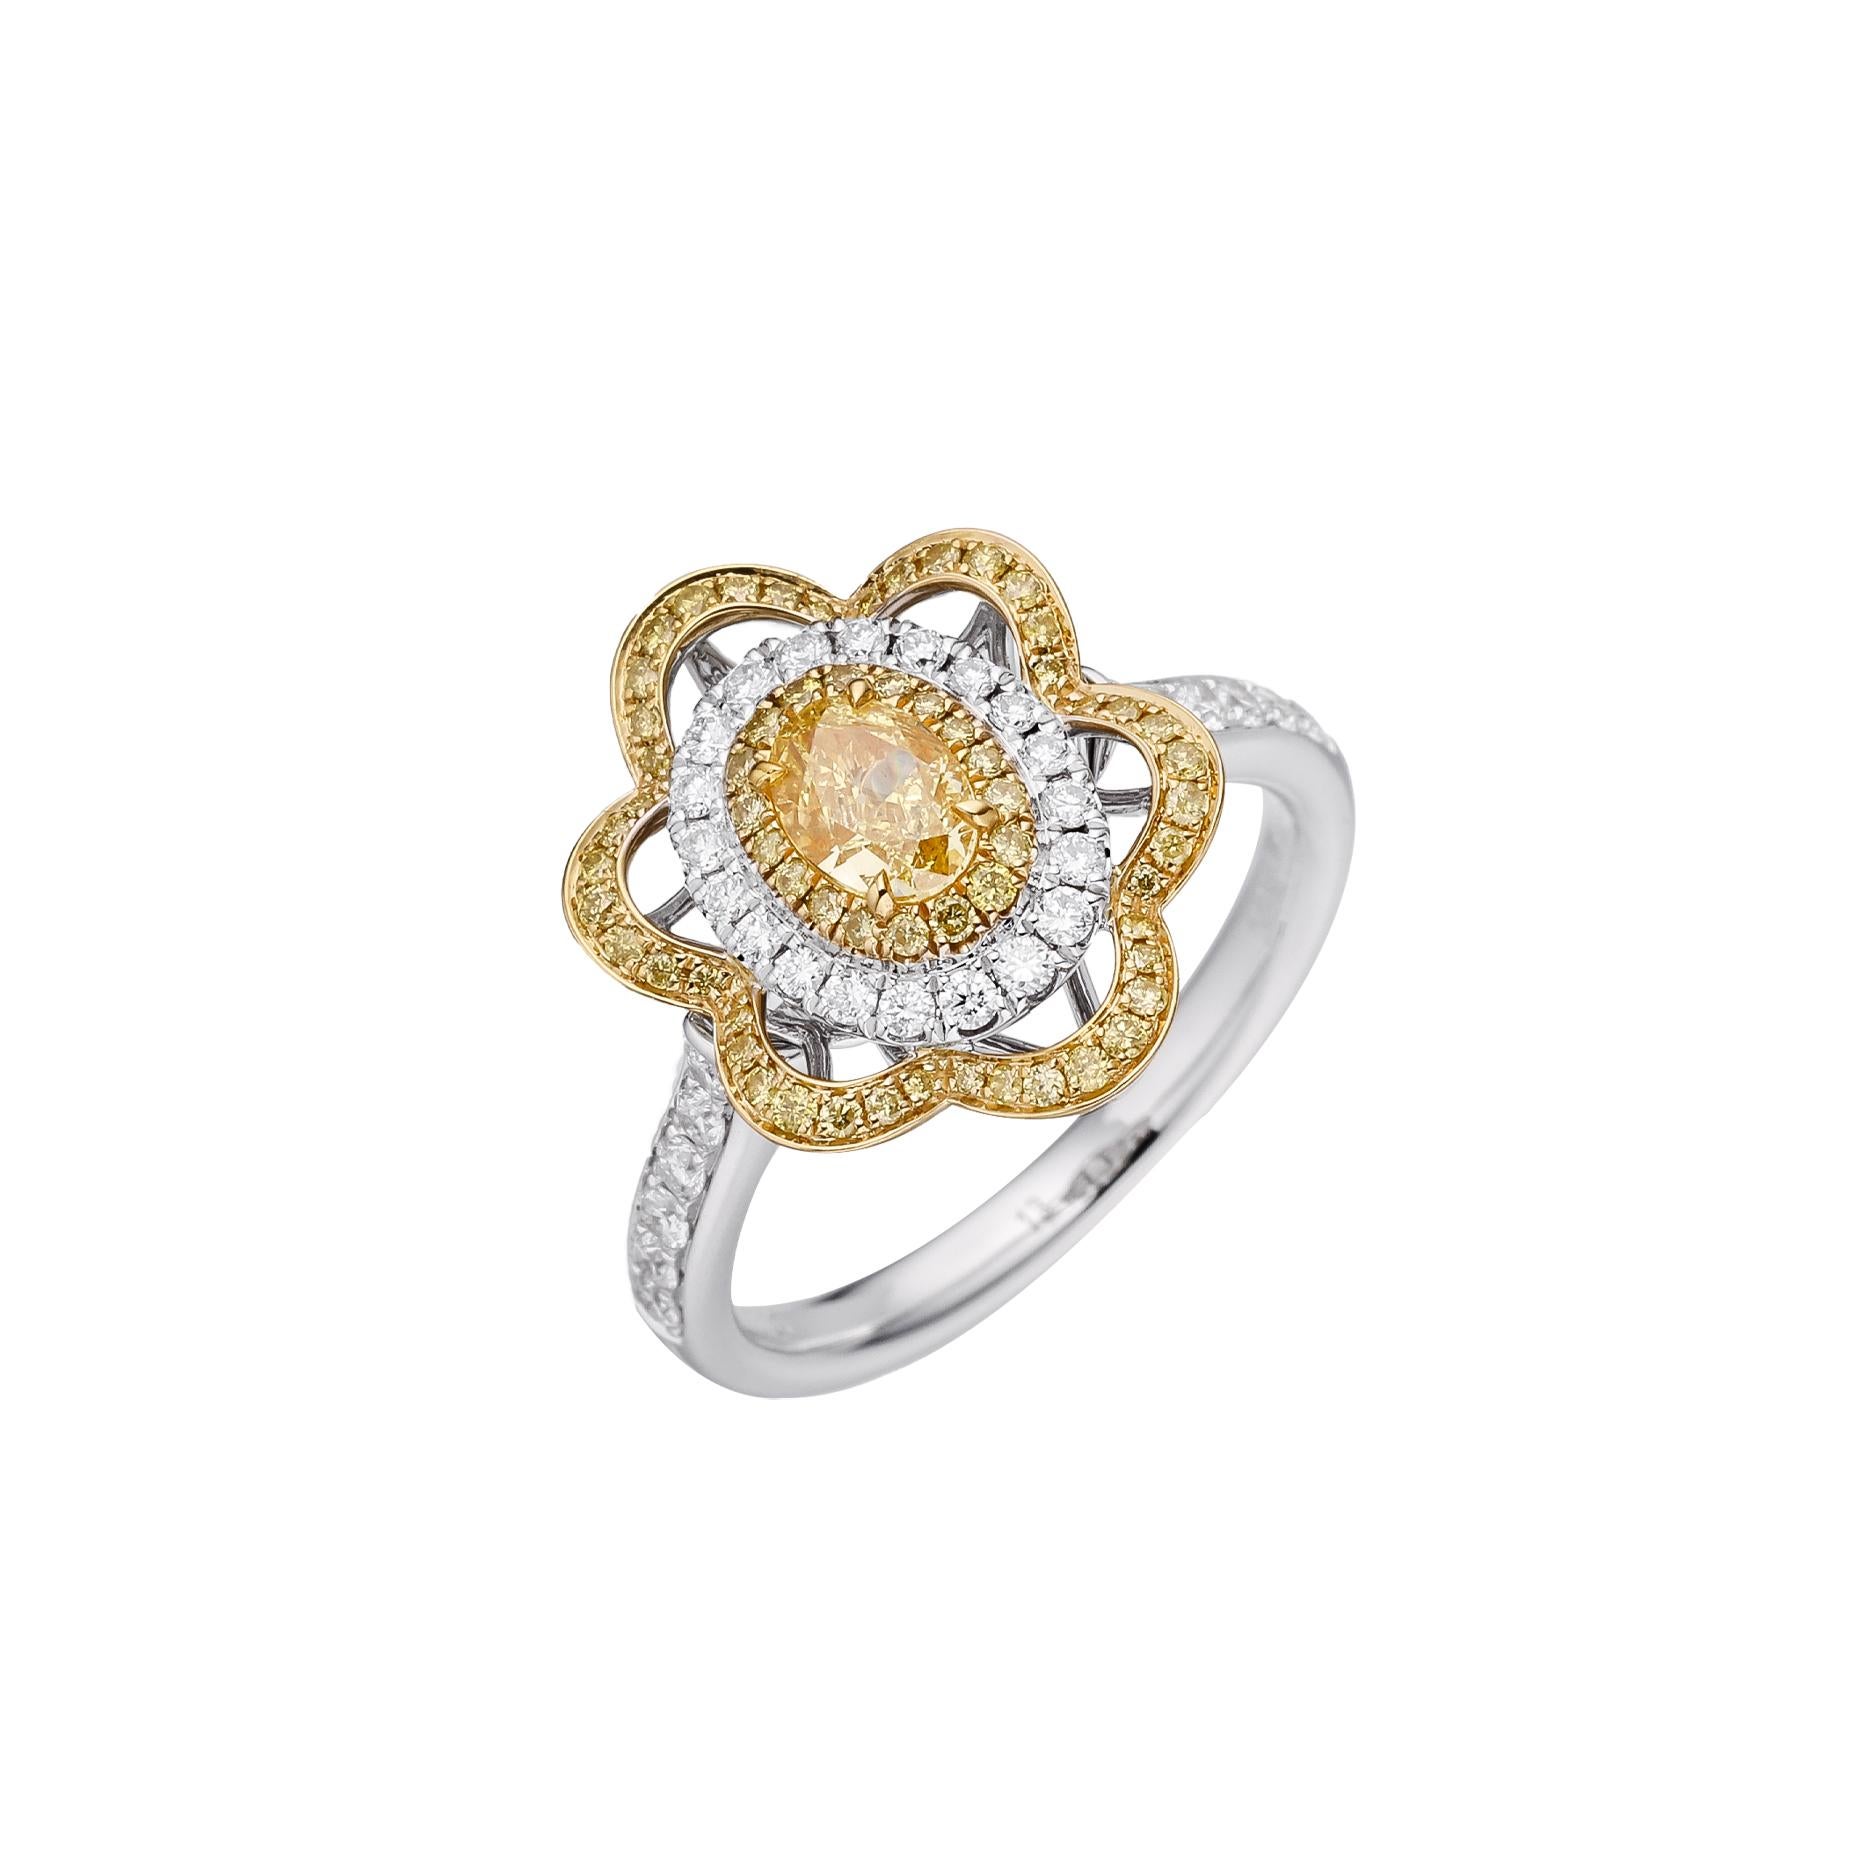 Experience the epitome of elegance with this exquisite jewelry piece featuring a GIA certified 0.50 carat oval shape fancy intense yellow natural diamond, set upon a lustrous 18kt gold band. Radiating with a captivating intensity, the central yellow